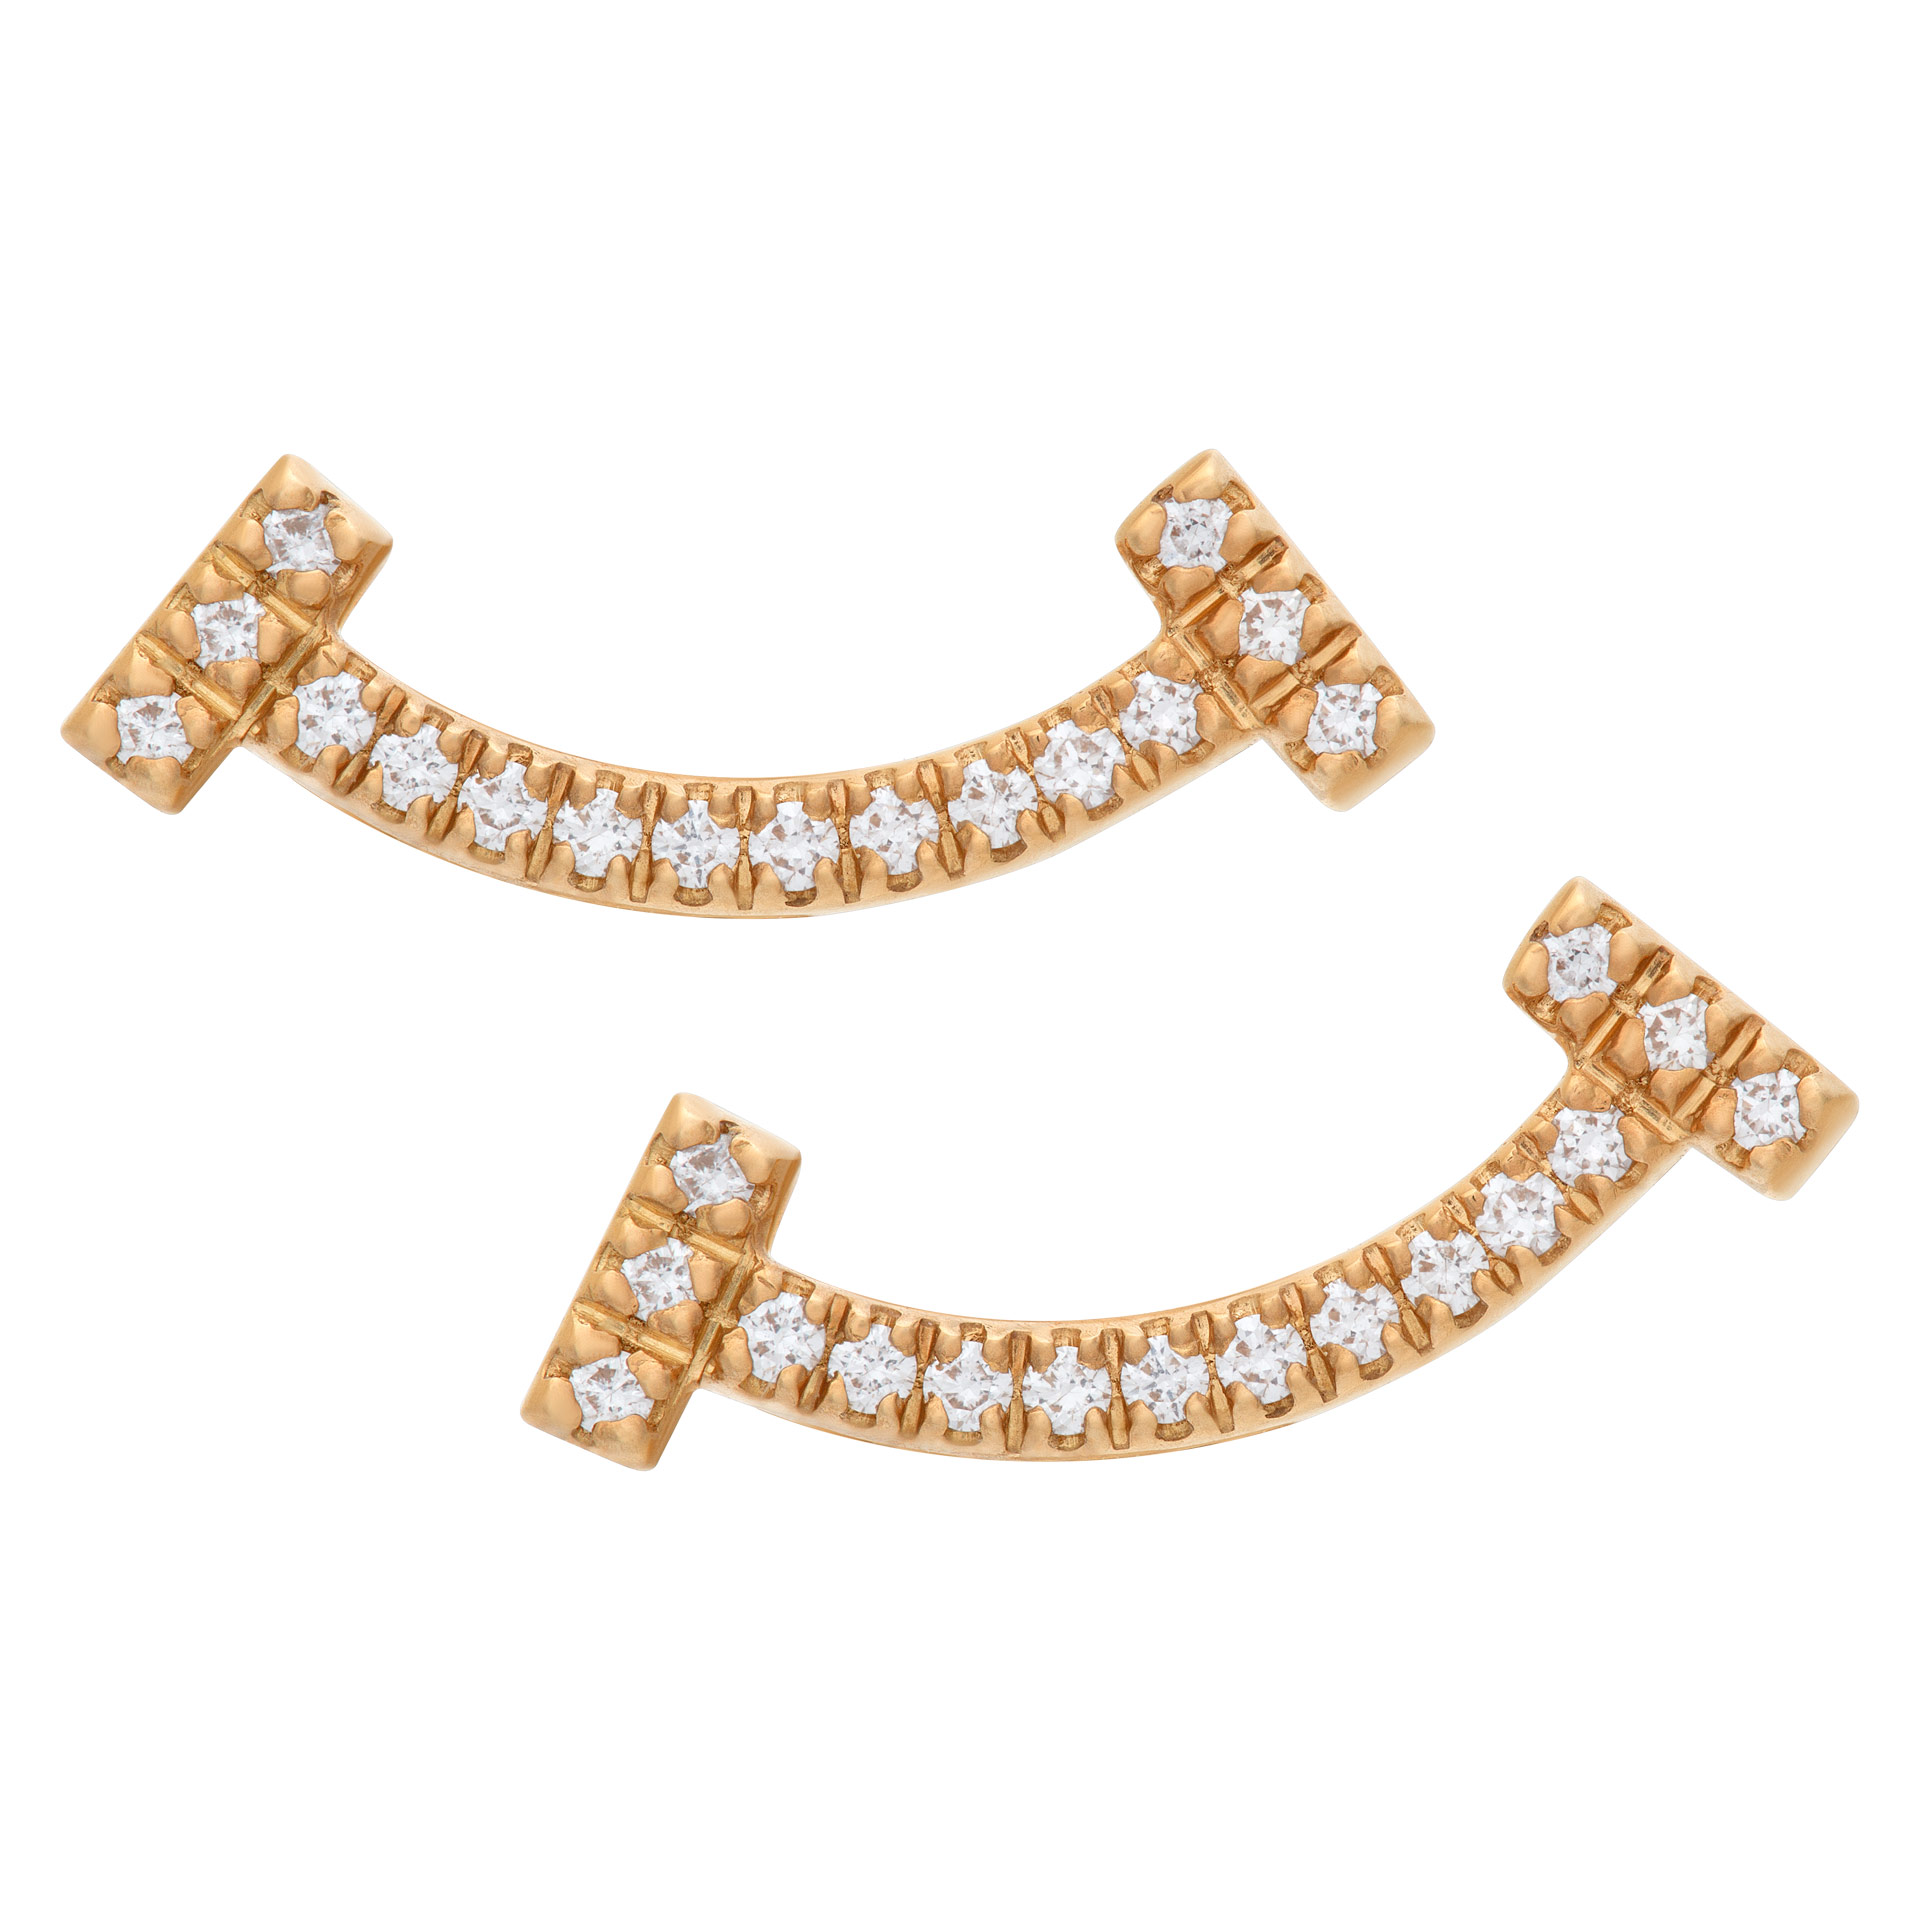 Tiffany & Co. diamond smile earrings in 18k rose gold with total carat weight of 0.06 carat